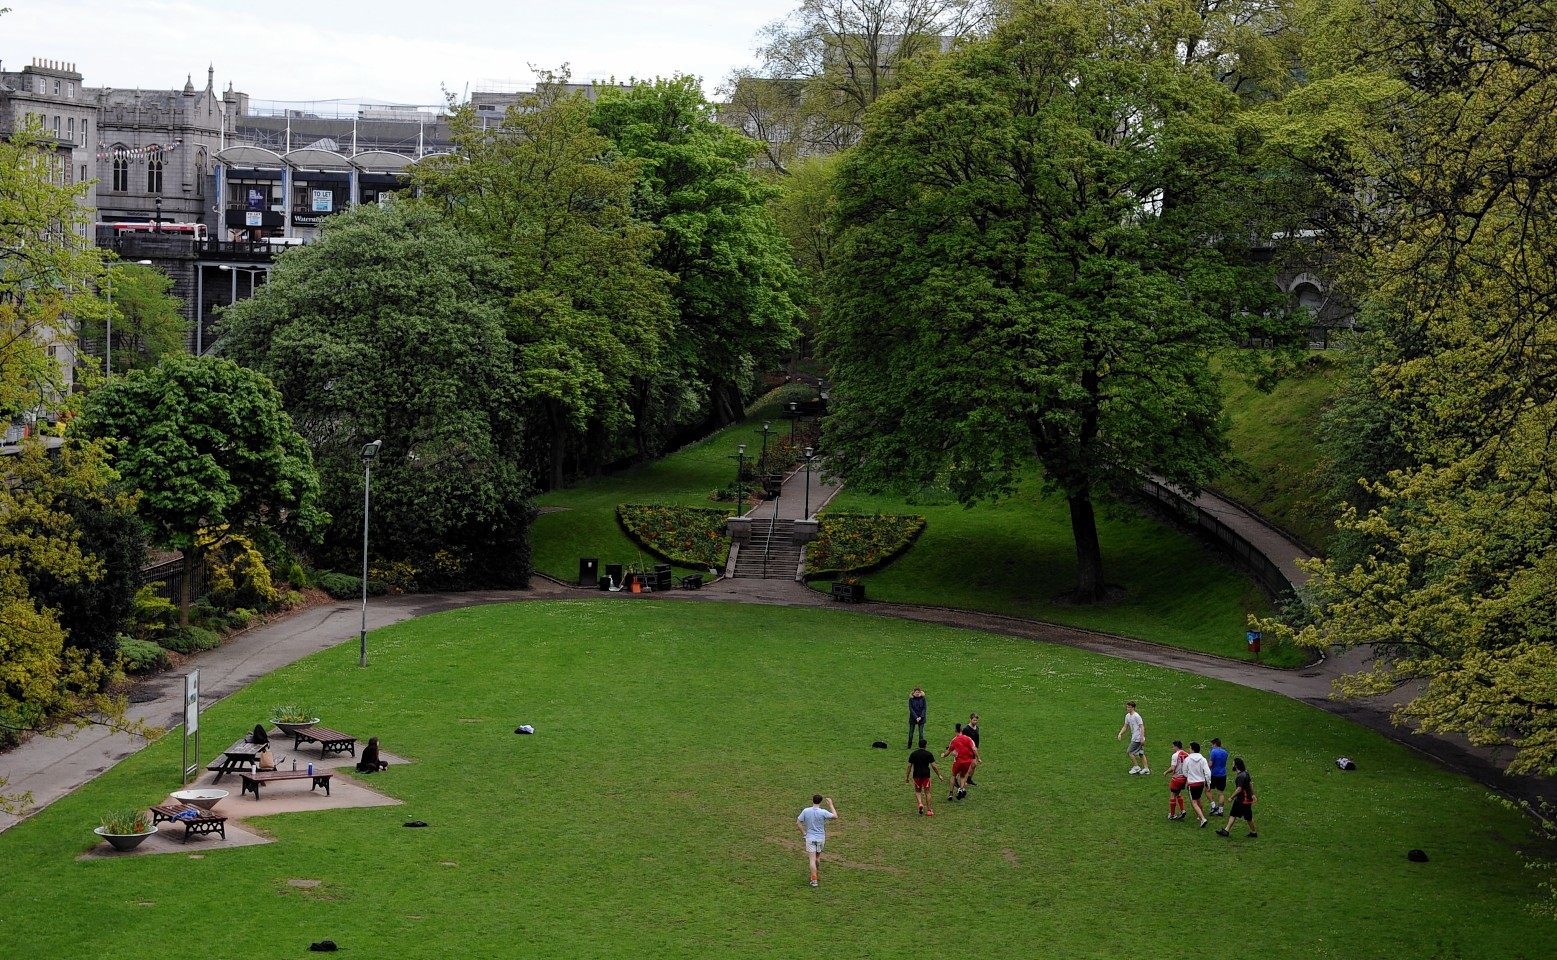 2014: A group playing football in Union Terrace Gardens